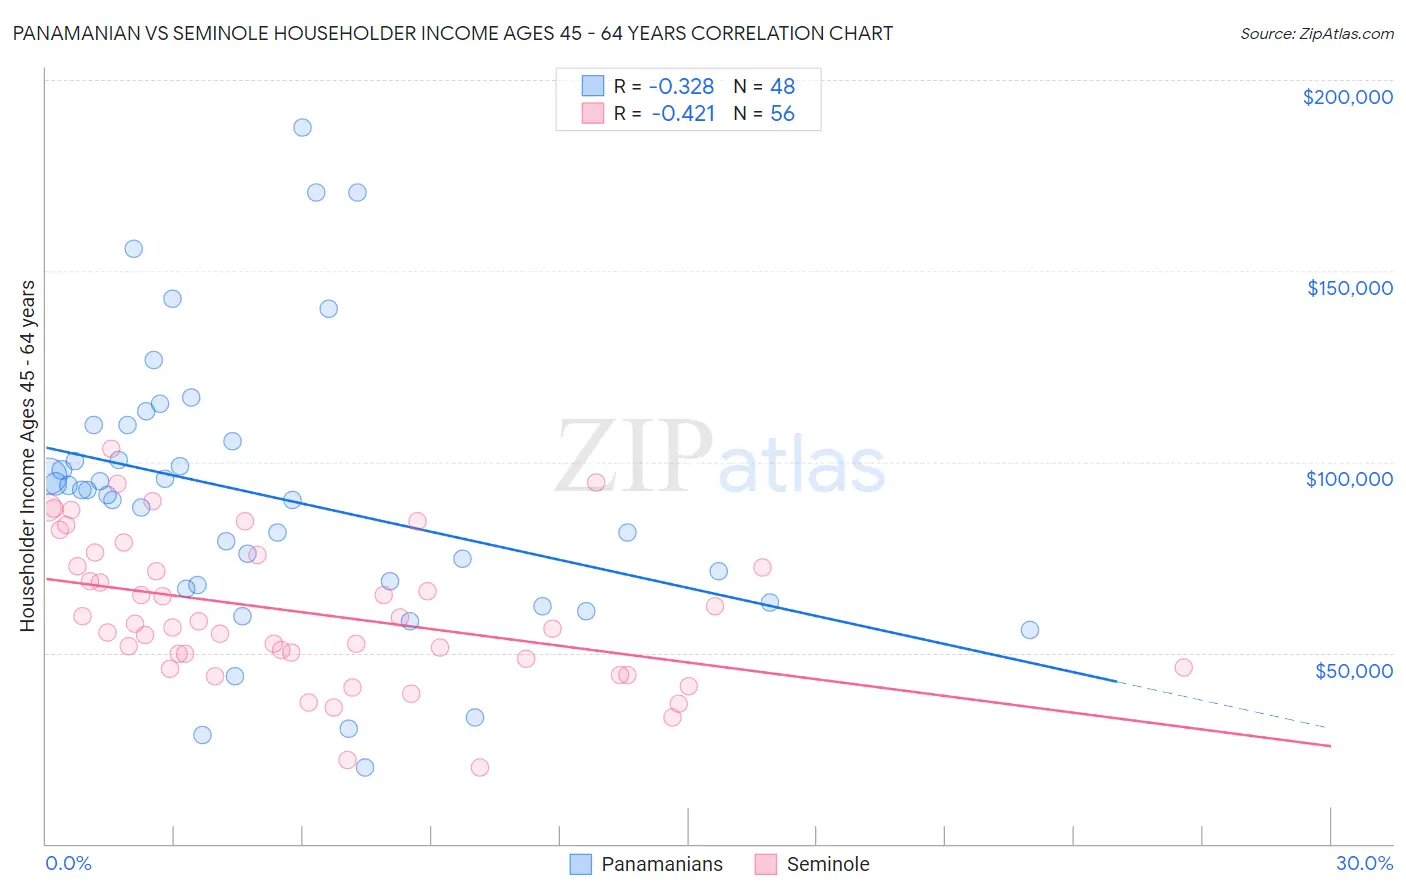 Panamanian vs Seminole Householder Income Ages 45 - 64 years